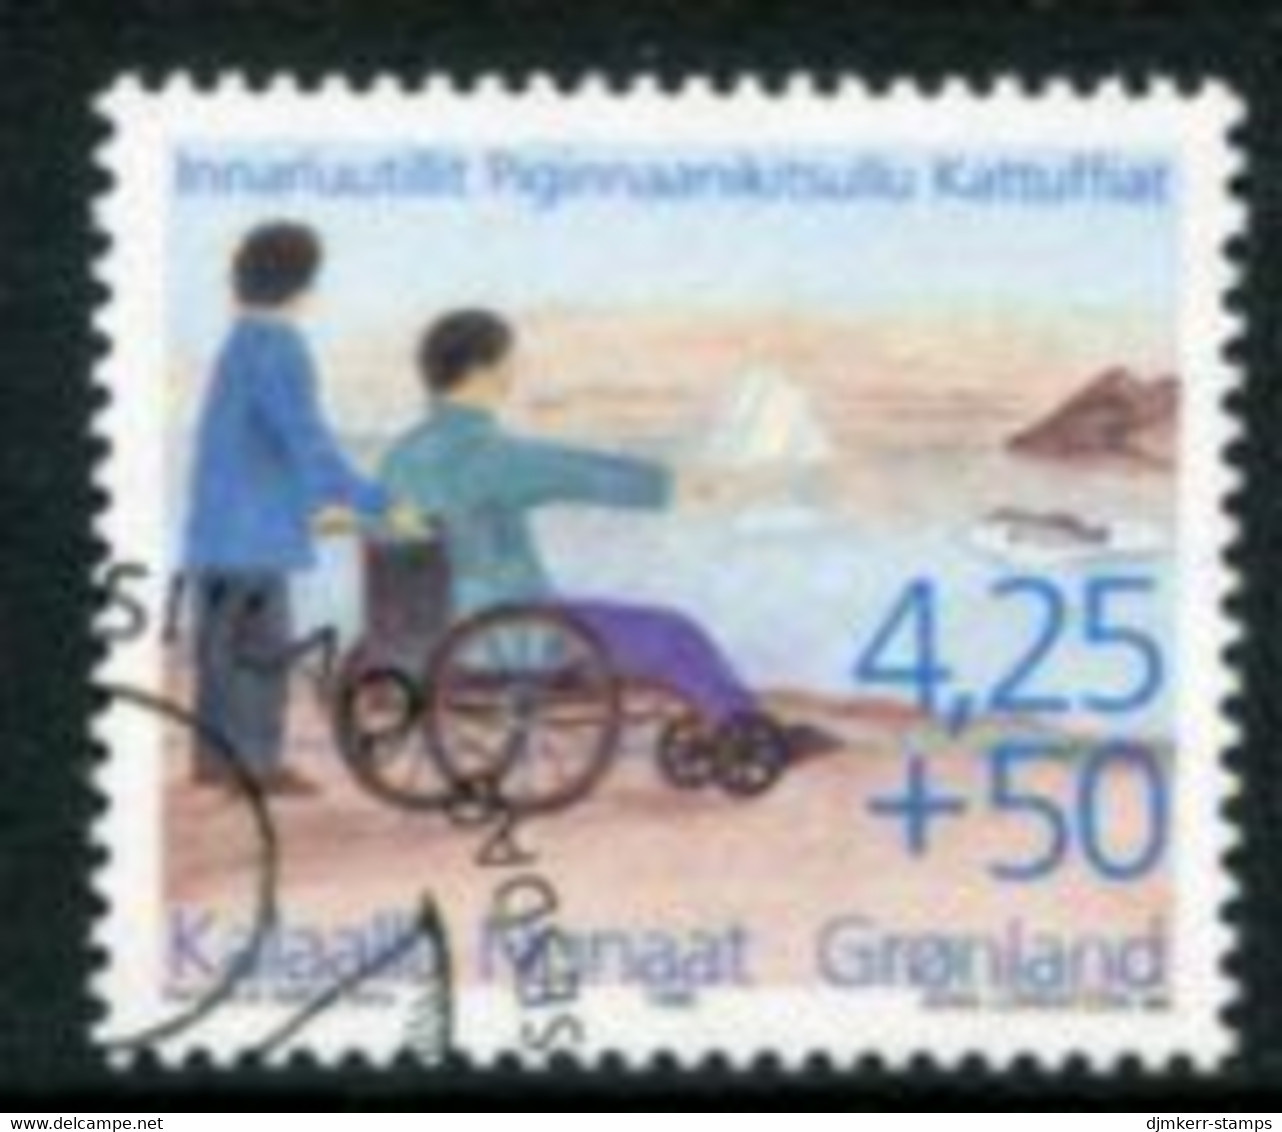 GREENLAND 1996 Society For The Disabled Used  Michel 296 - Gebruikt